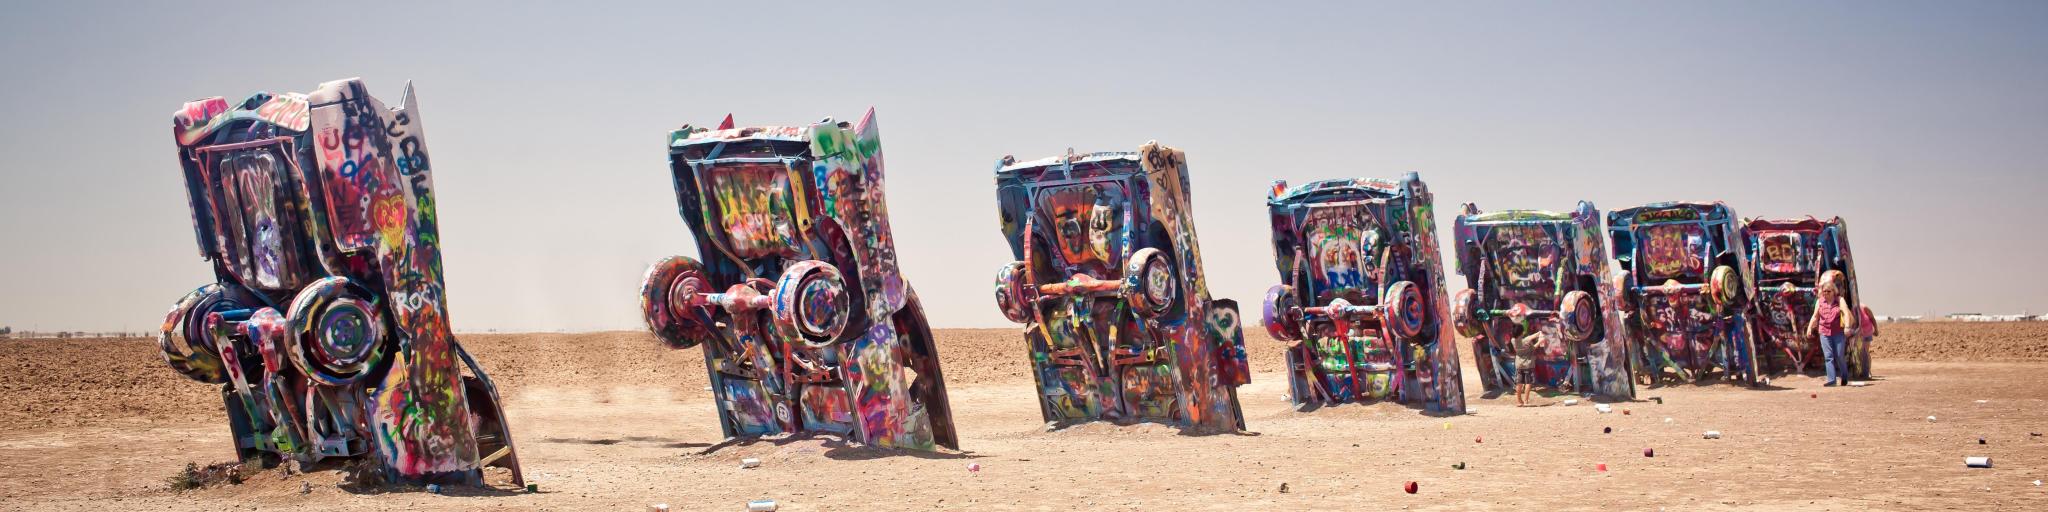 Graffiti-covered Cadillac cars in an art installation, sticking out of the ground in the desert